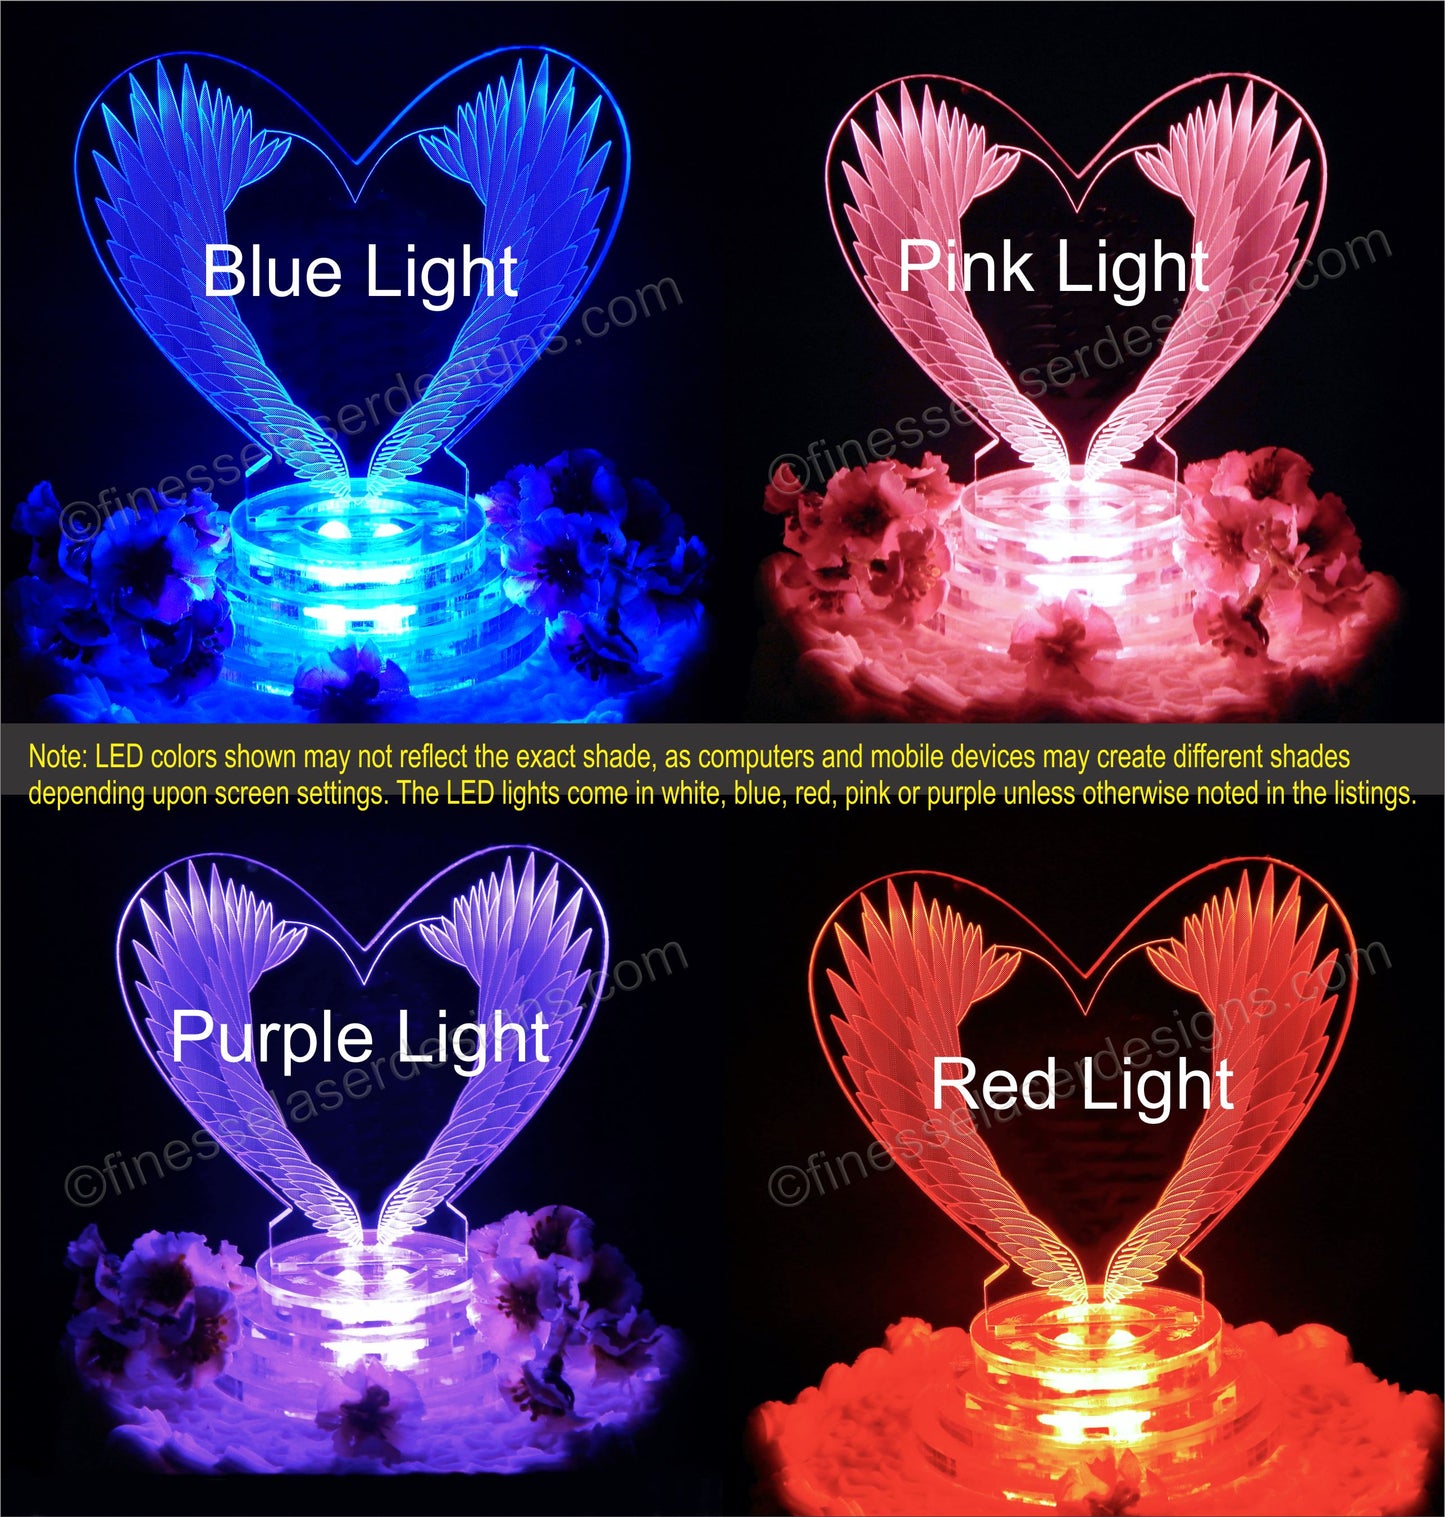 colored lighted views showing heart shaped cake topper designed with angel wings, shown in blue, pink, purple and red lights